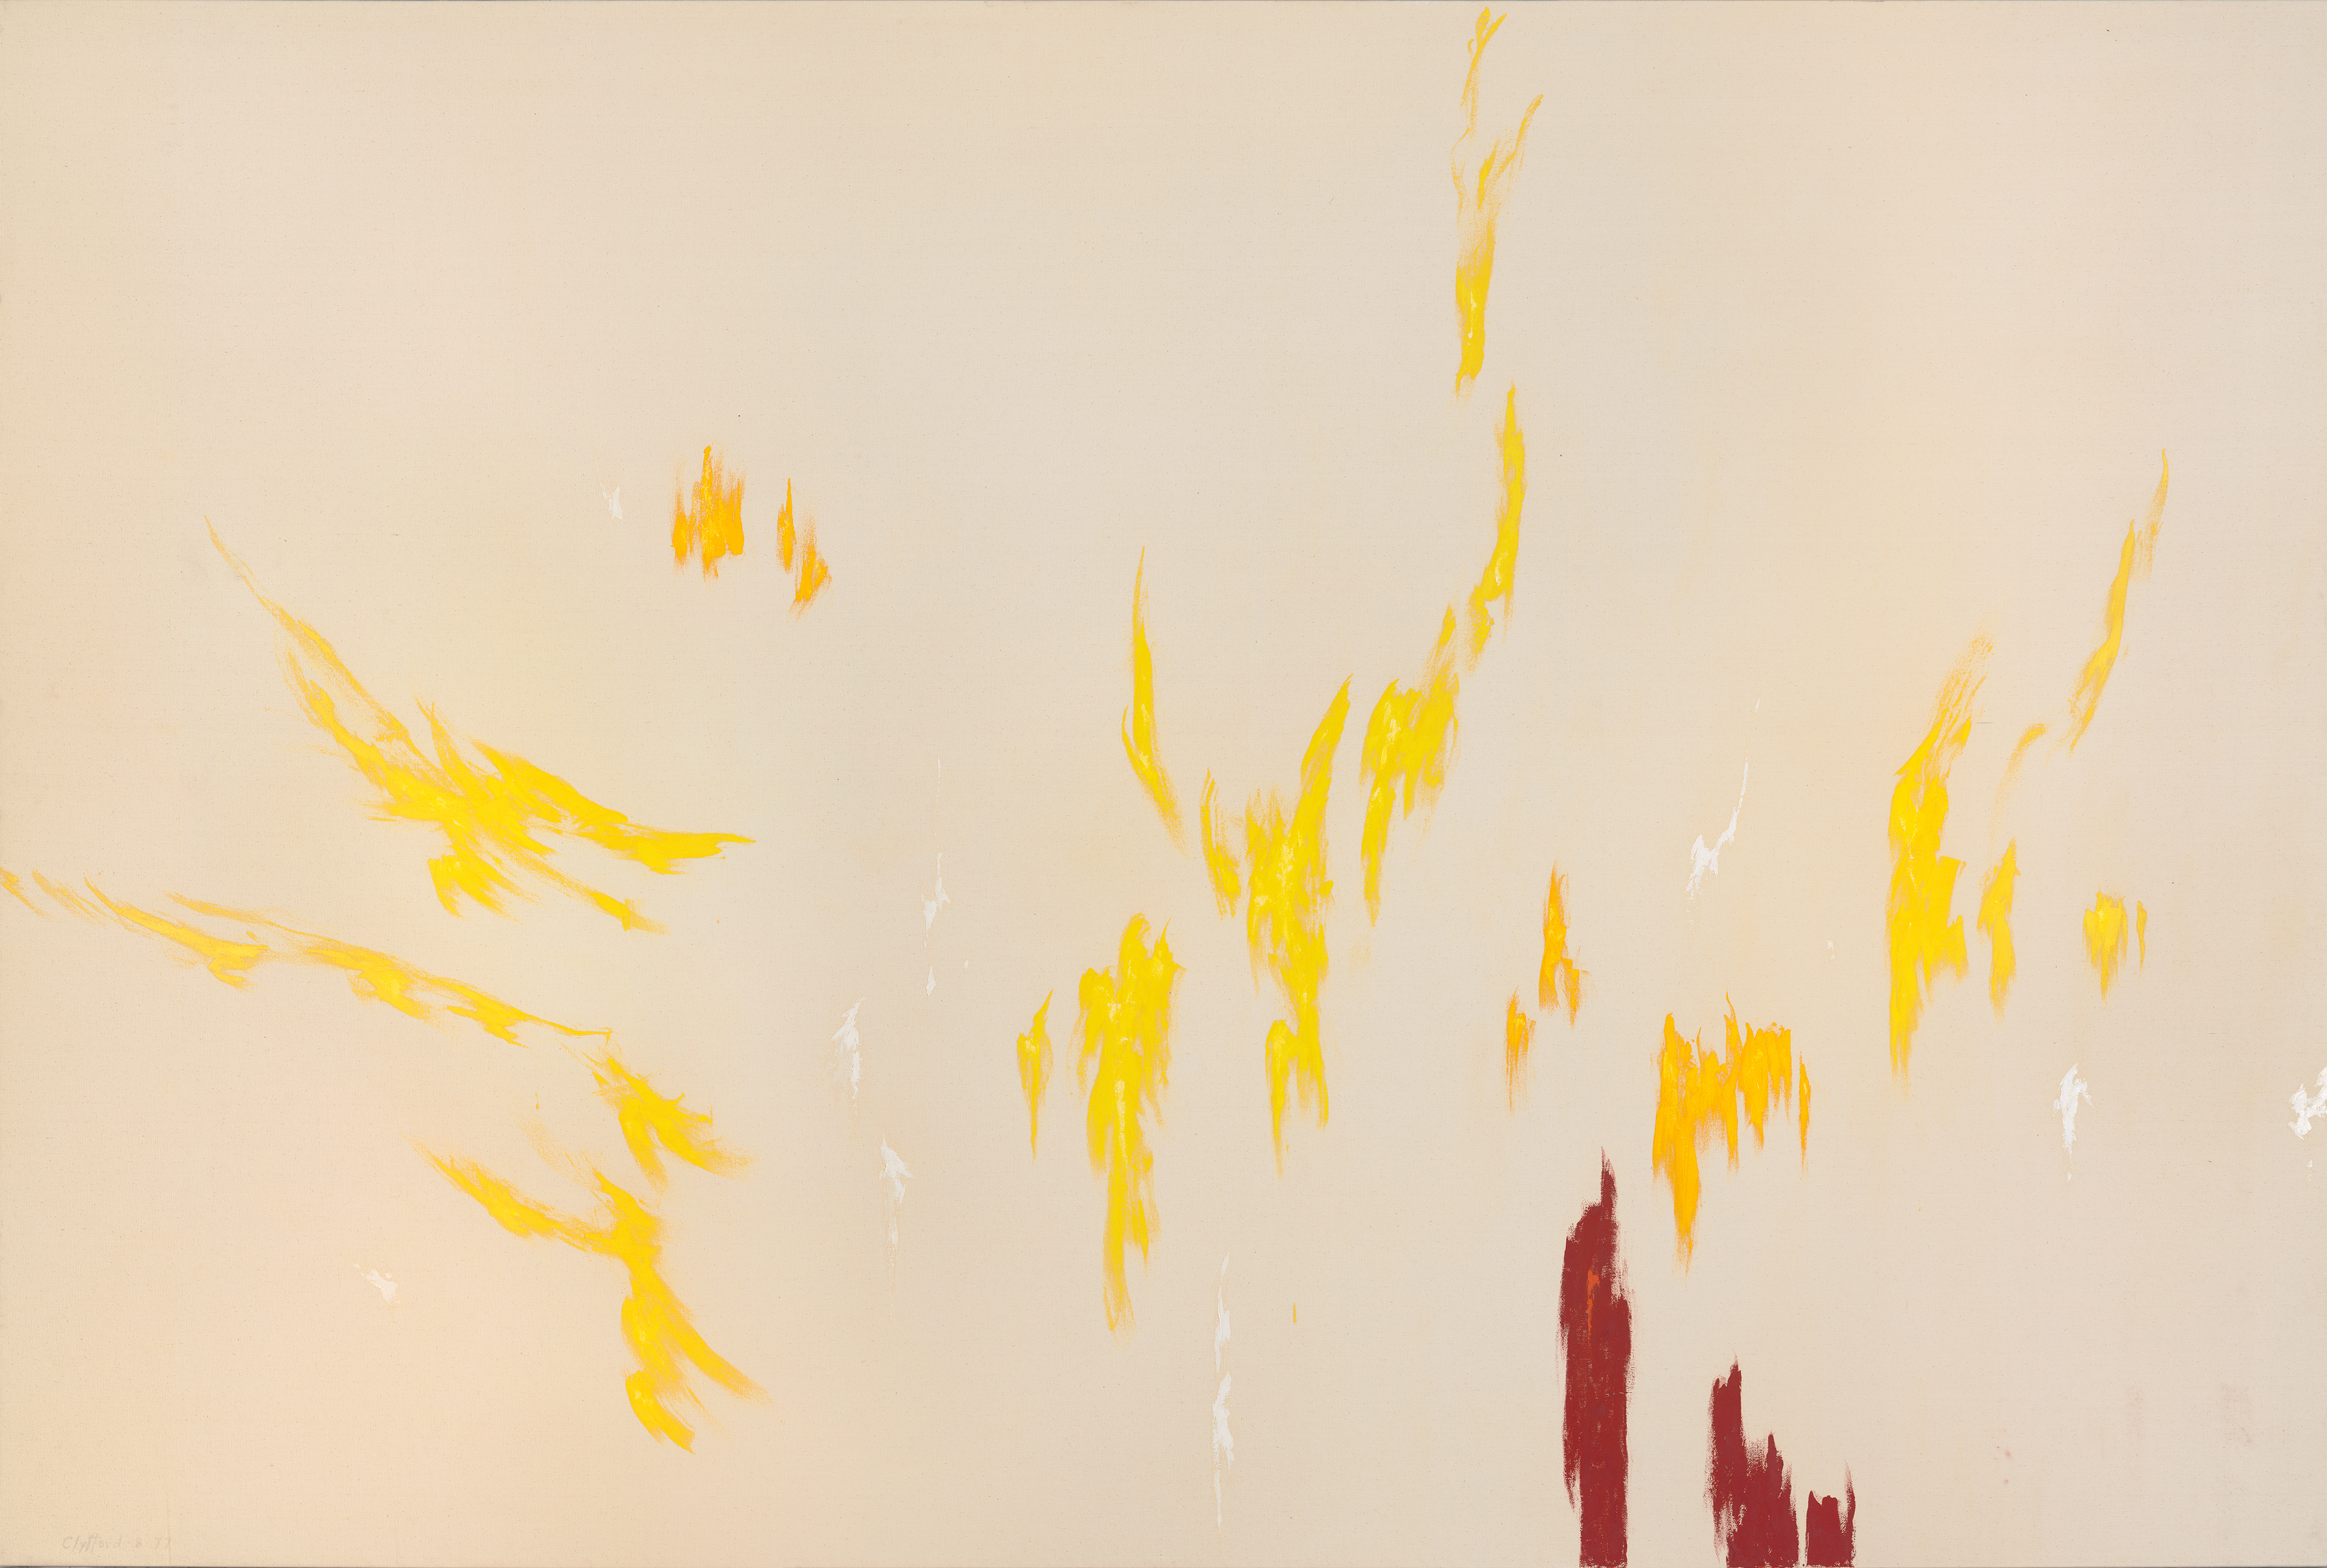 Clyfford Still, PH-1049, 1977. Oil on canvas, 114 x 172 inches (289.6 x 436.9 cm). Courtesy of the Clyfford Still Museum © City and County of Denver /ARS, NY